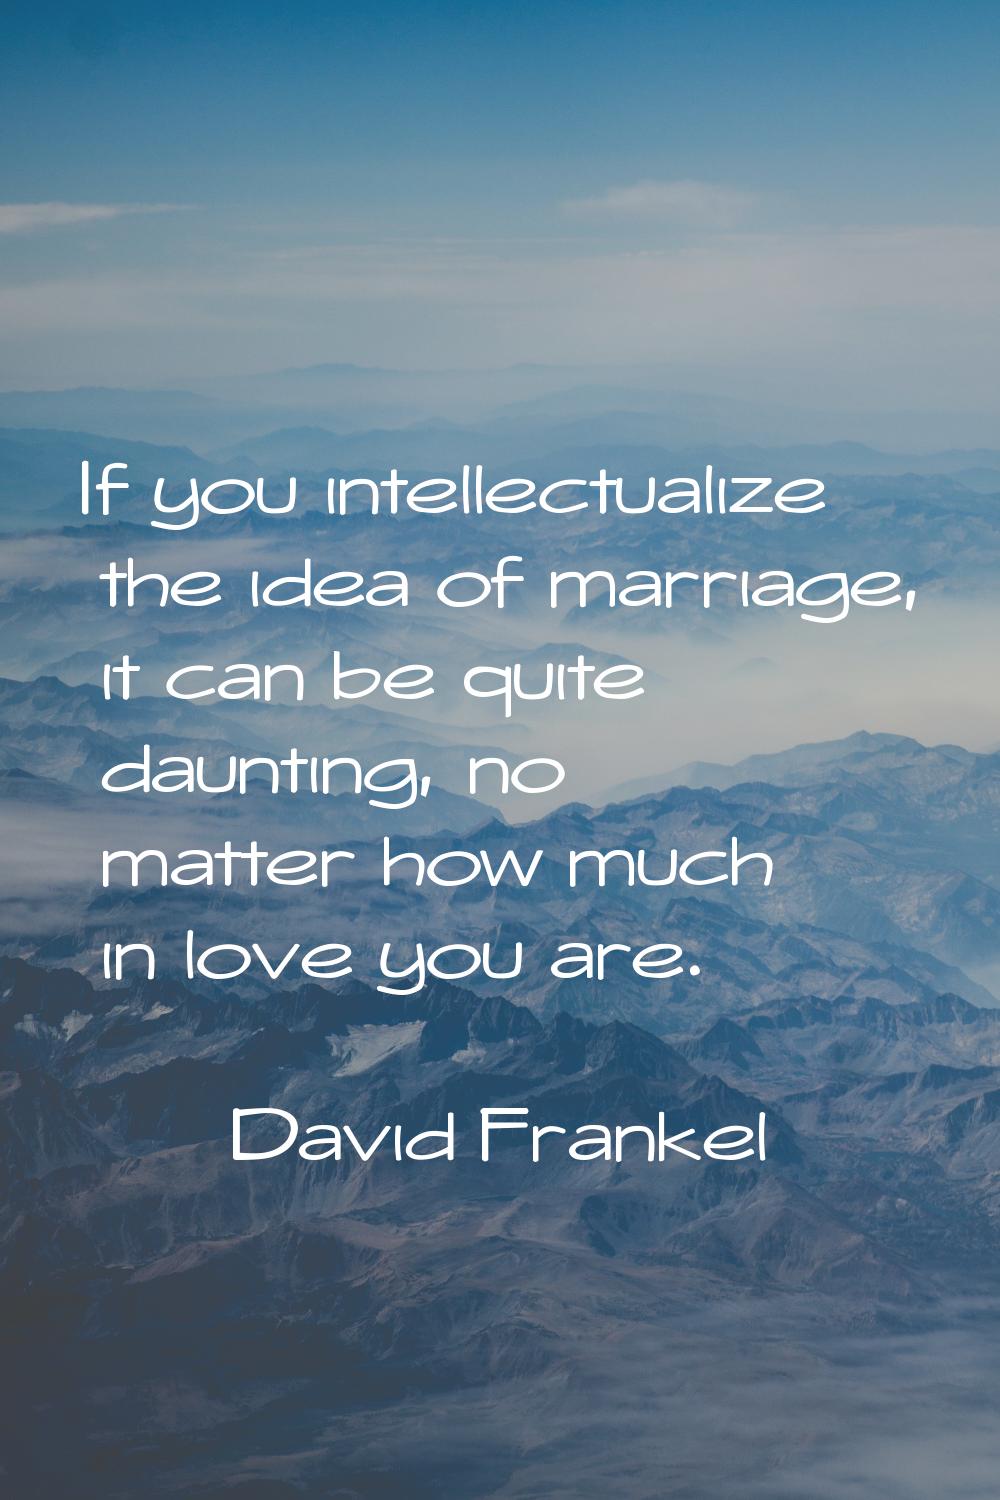 If you intellectualize the idea of marriage, it can be quite daunting, no matter how much in love y